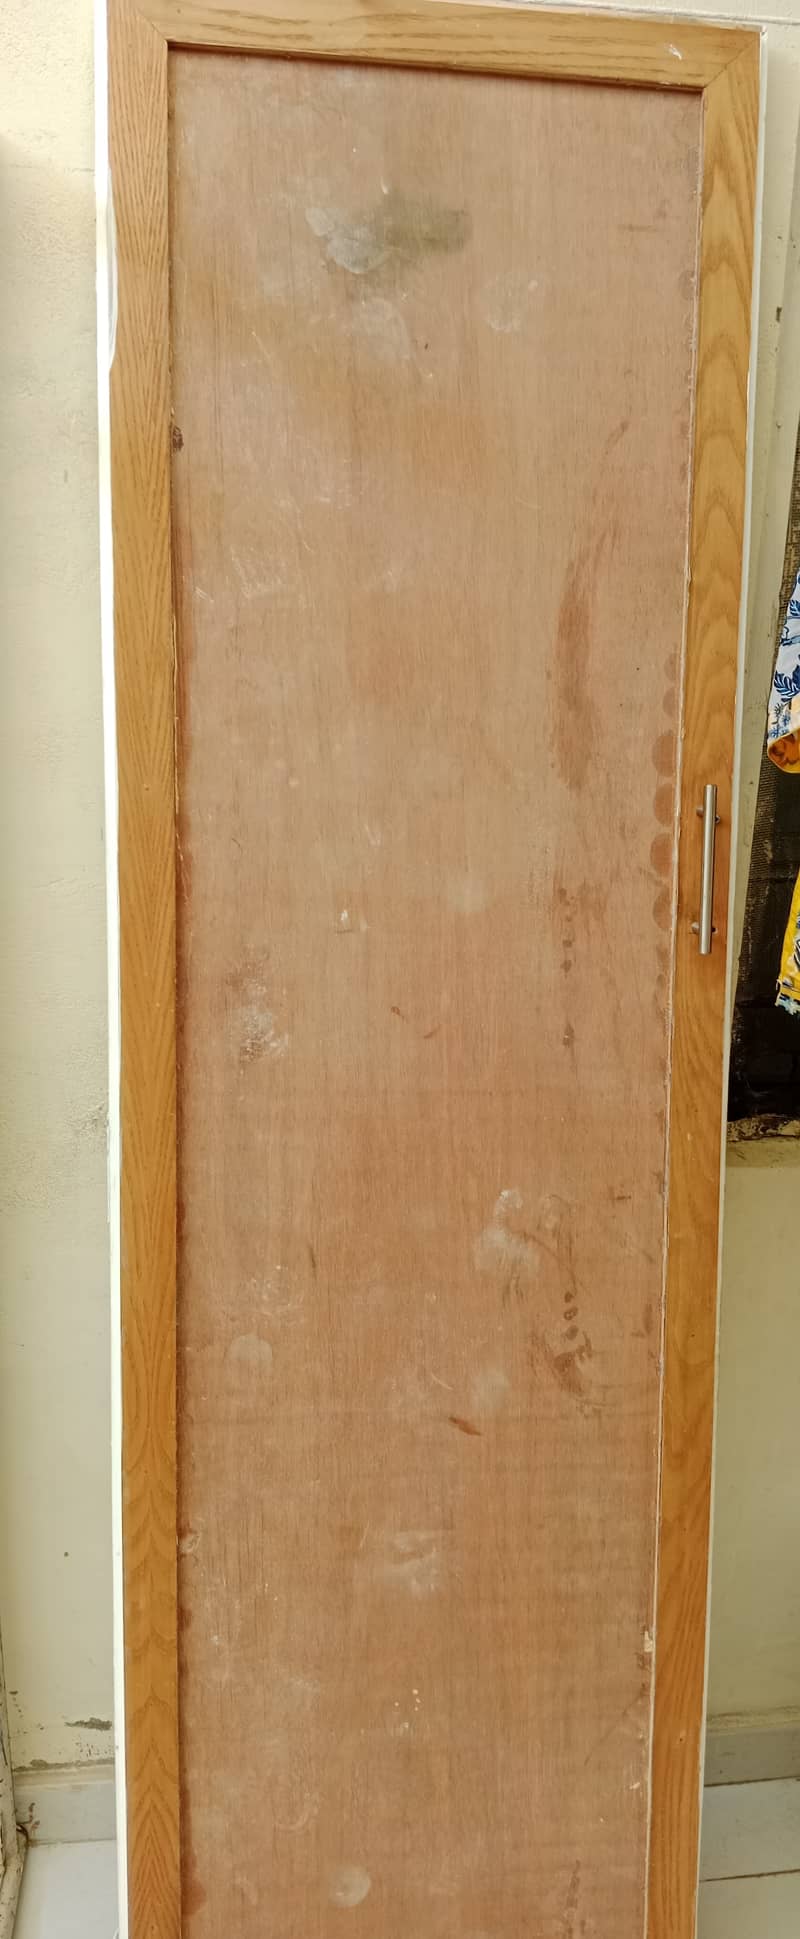 Door for sale neat and clean only WhatsUp 03060103003 2